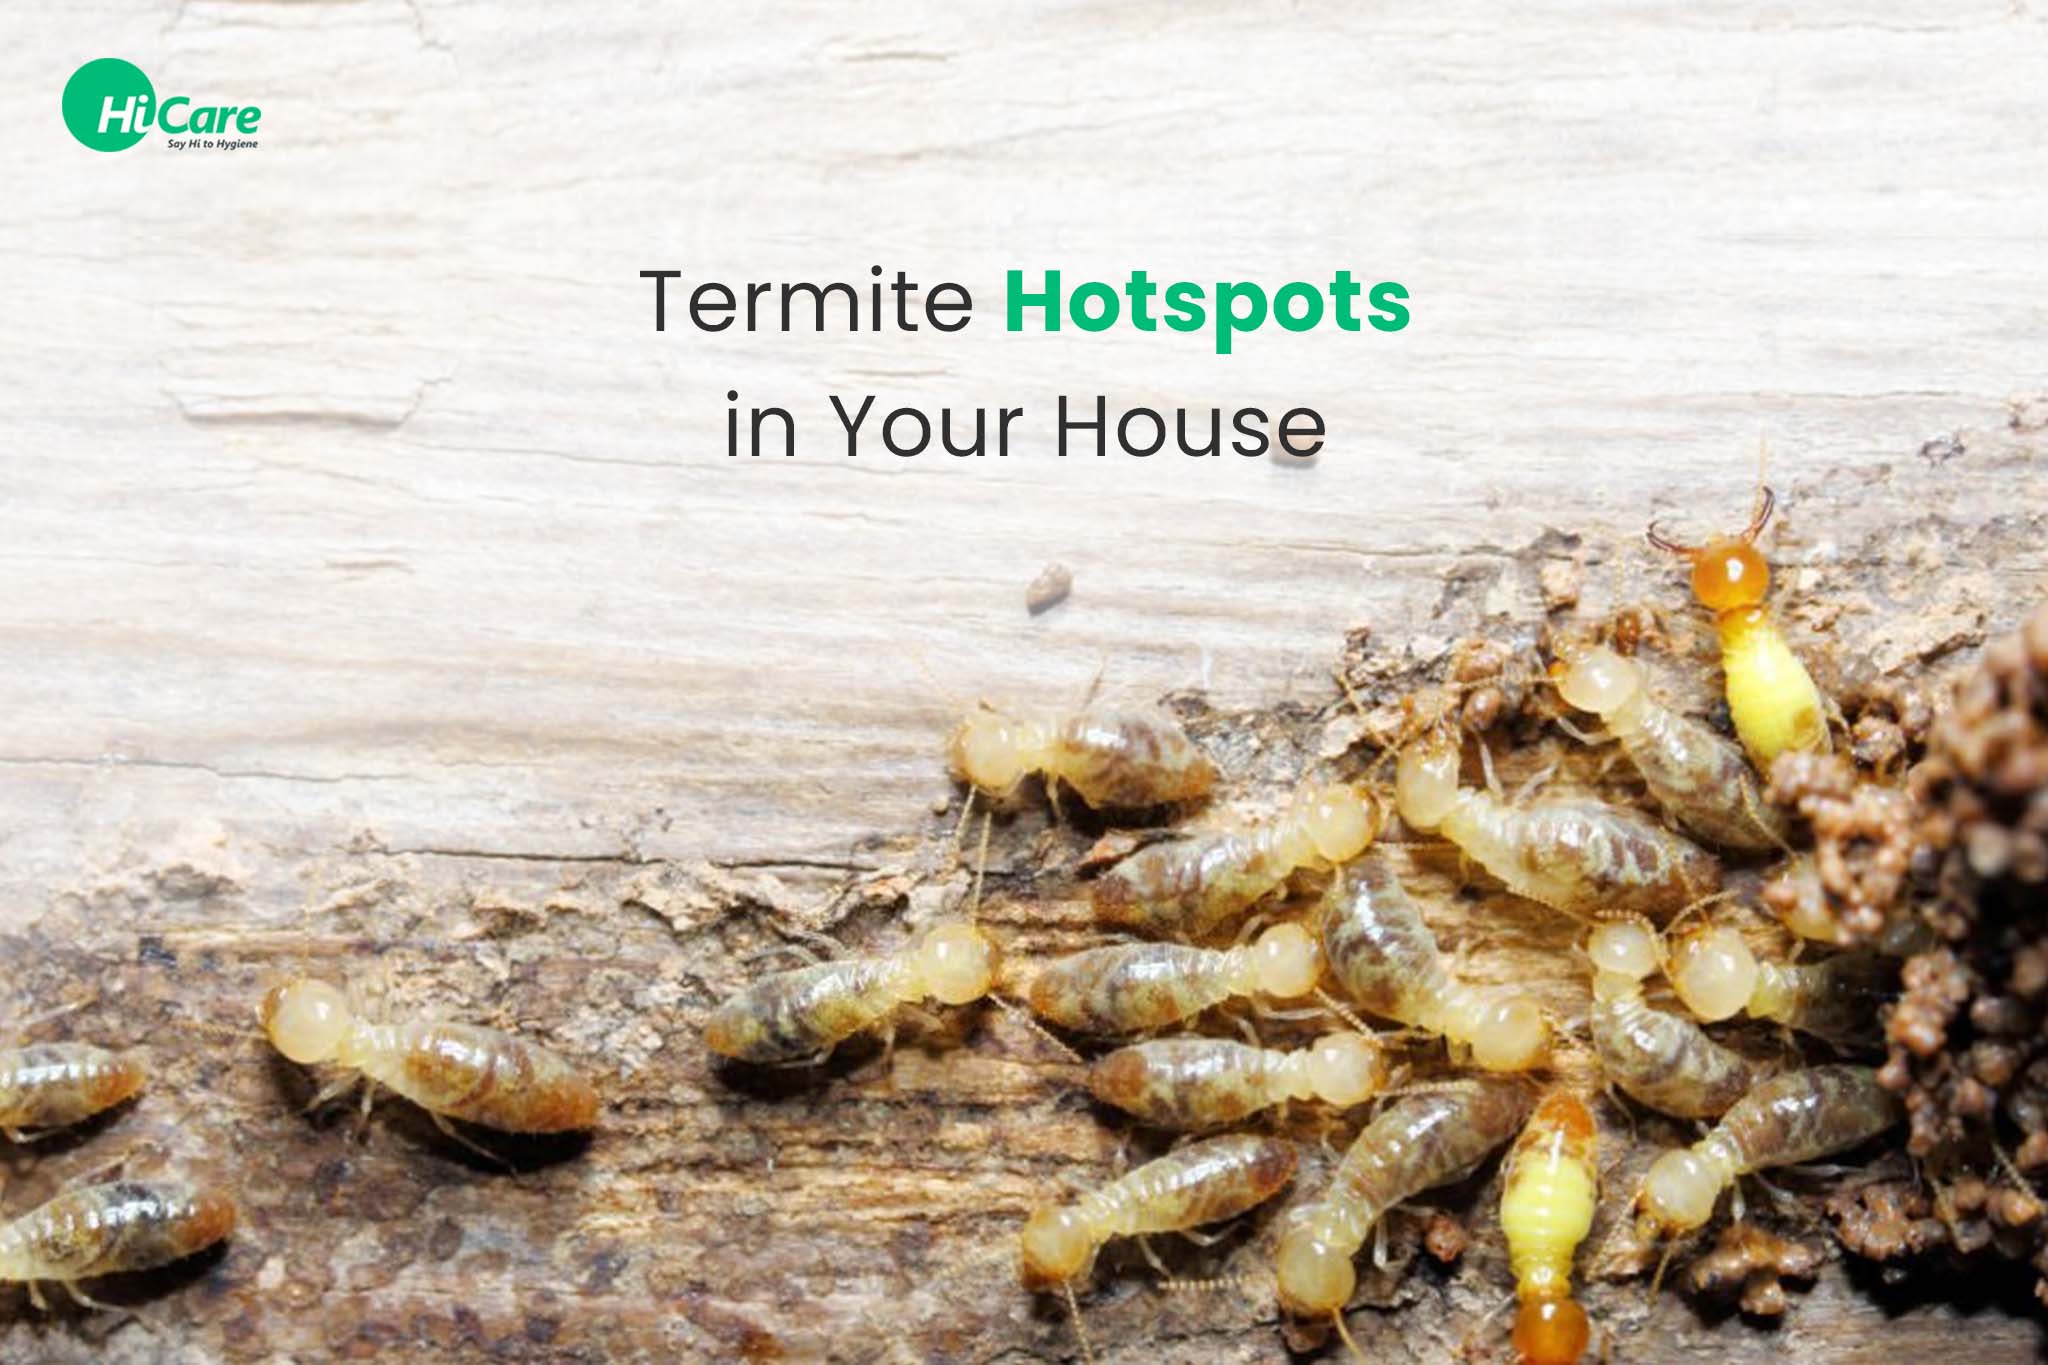 10 Termite Hotspots in Your House and How to Prevent Them